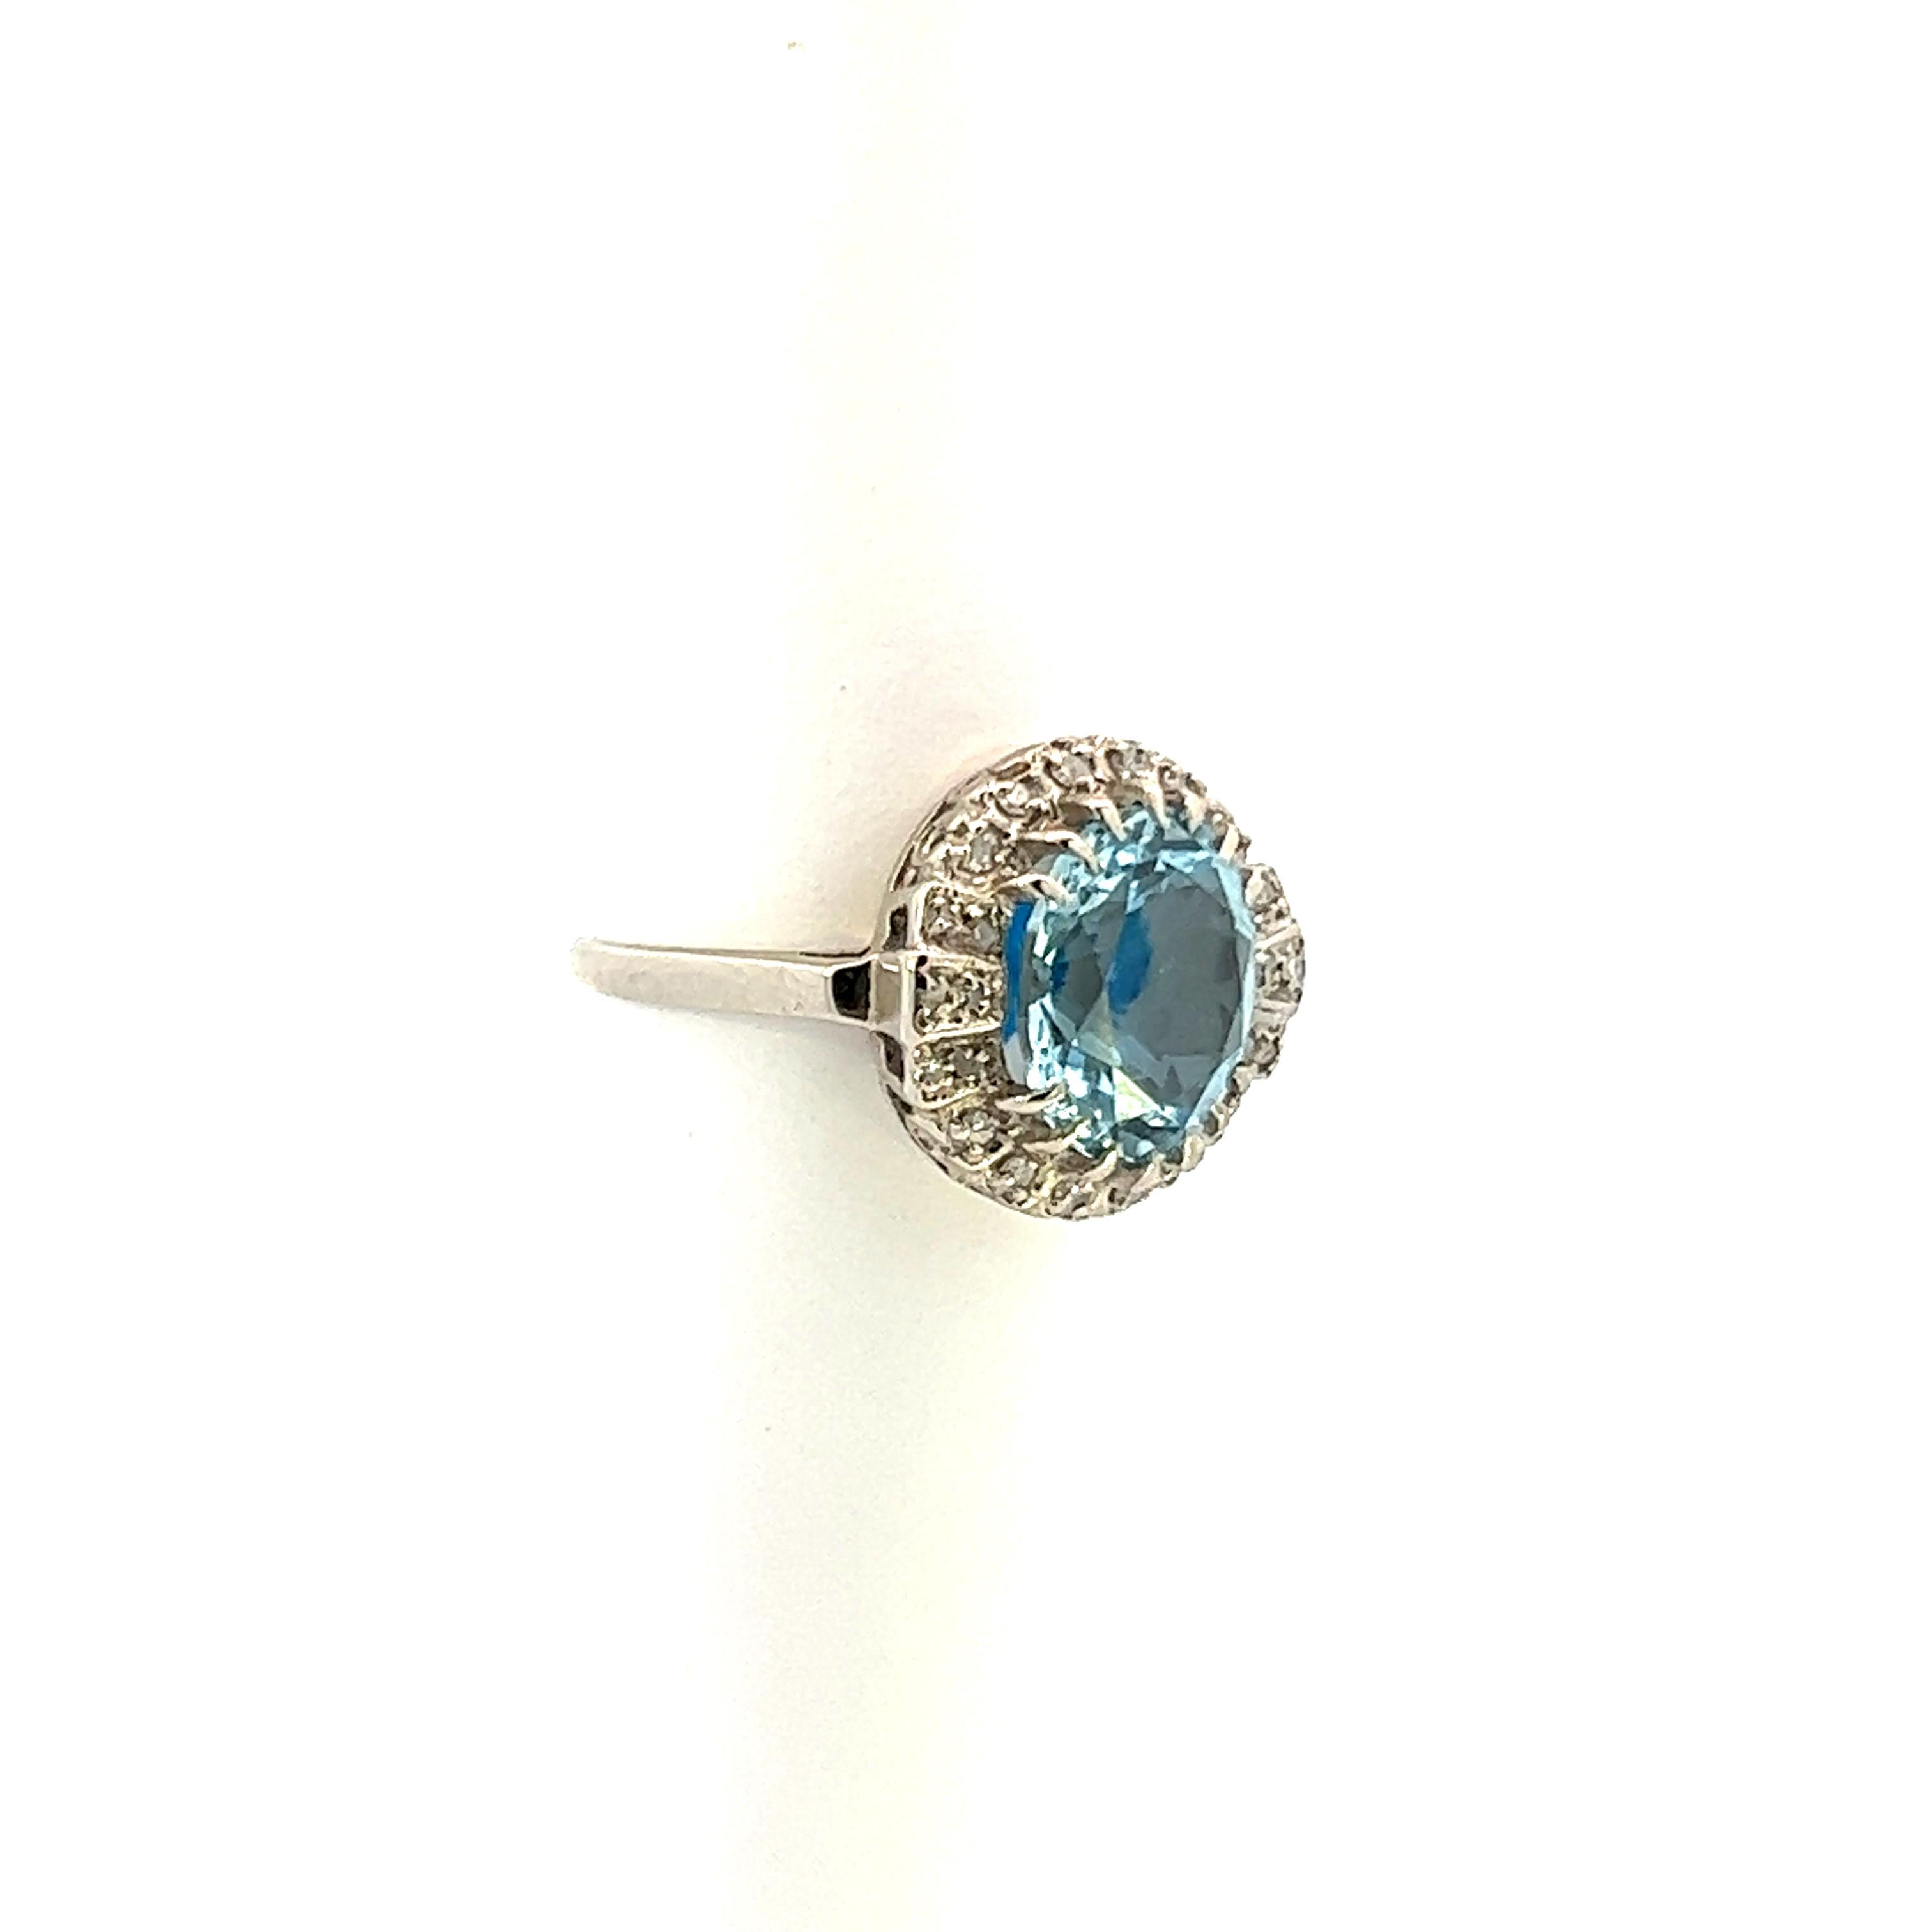 This 14k white gold aquamarine and diamond contemporary cocktail ring is spectacular. The uniqueness of the ring comes from the combination of the aquamarine, diamond and white gold; all creating a natural wonder. The center stone is a gorgeous 3.57